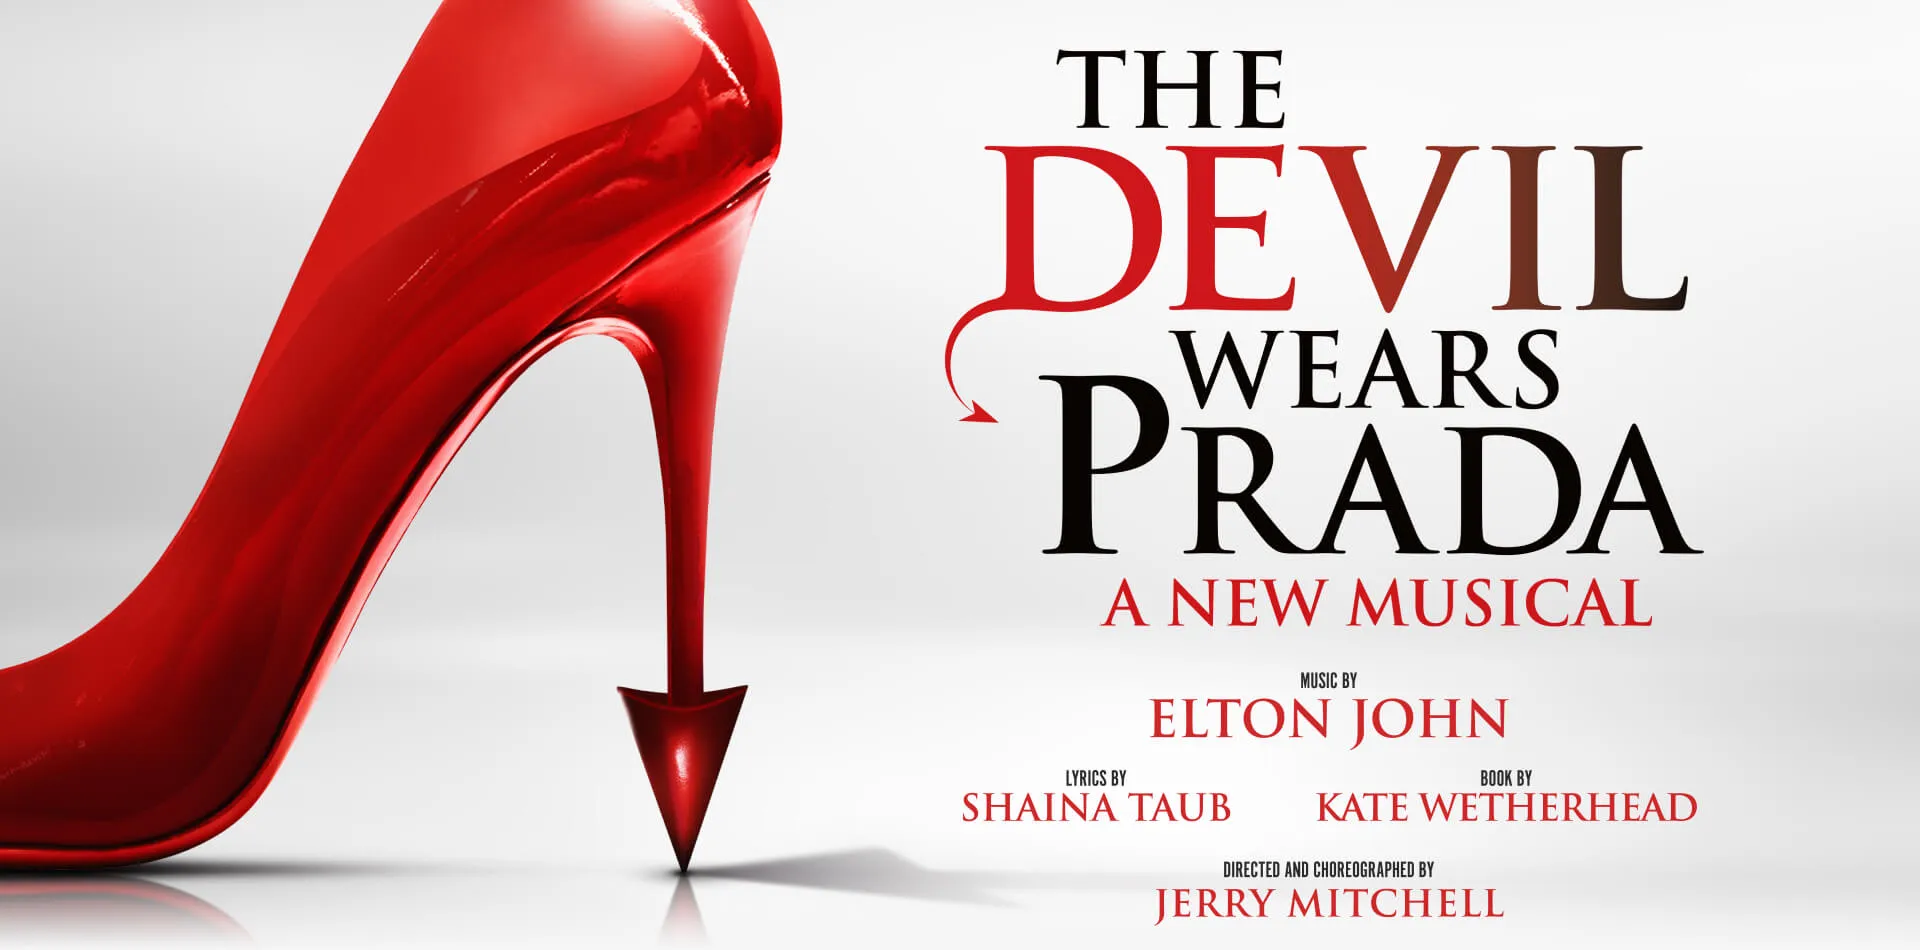 The Devil Wears Prada - a new musical based on the blockbuster film and bestselling novel